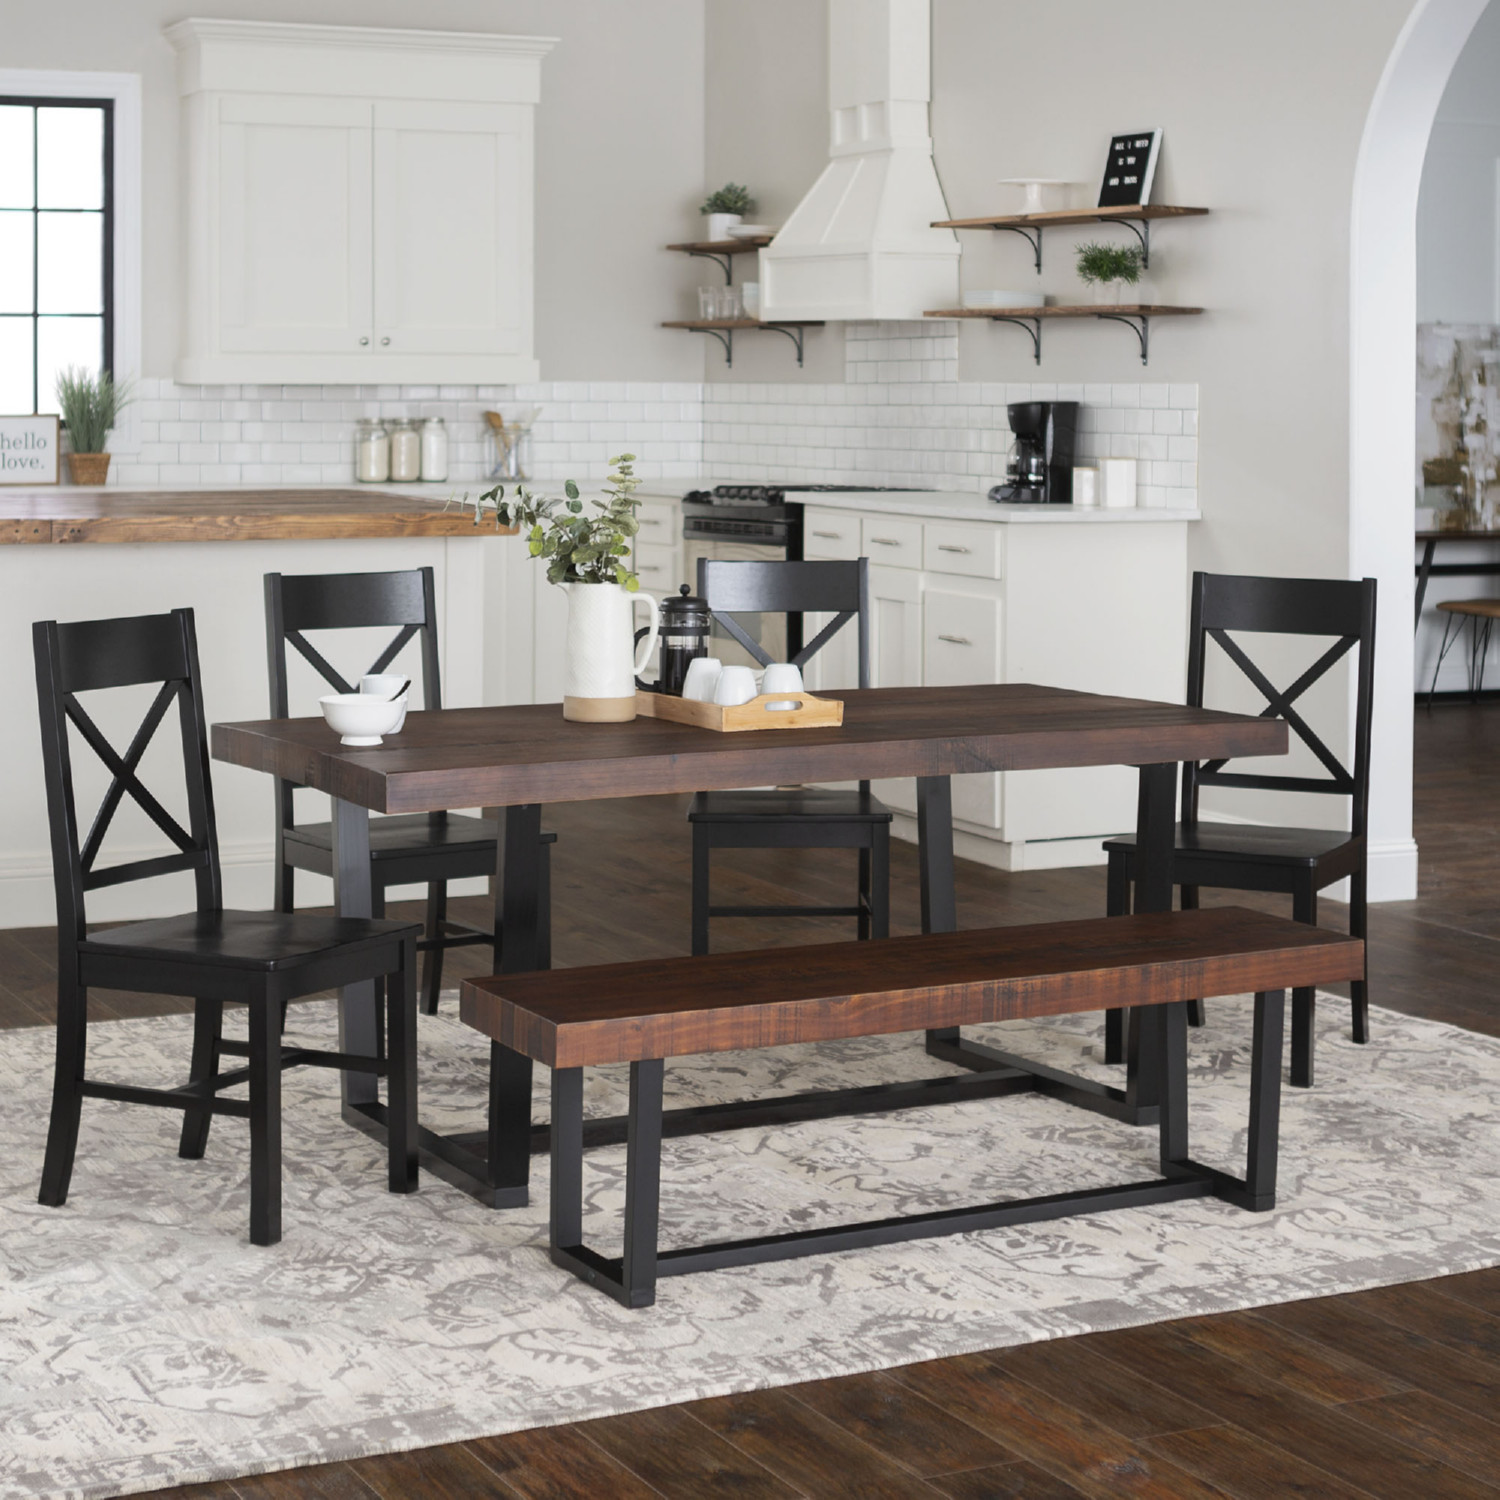 7 Piece Kitchen & Dining Room Sets You'll Love